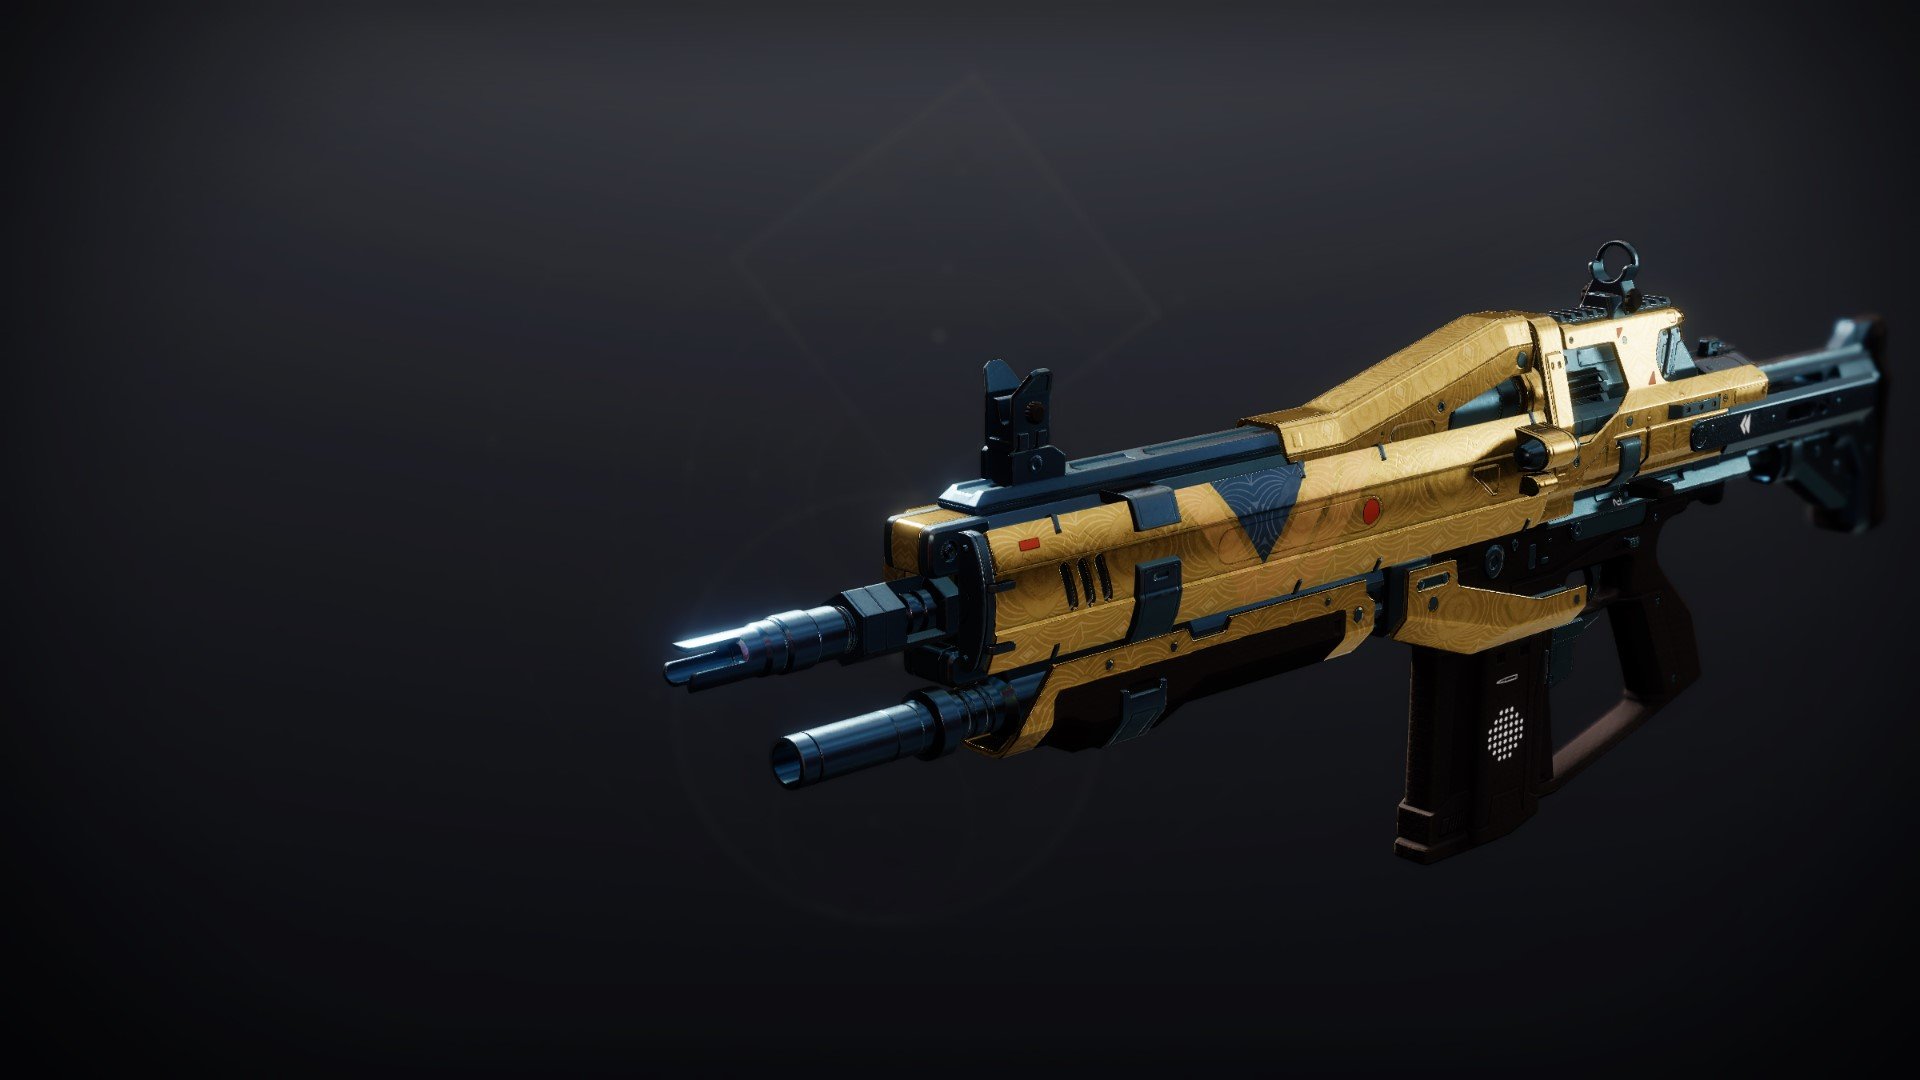 An in-game render of the Shadow Price (Adept).